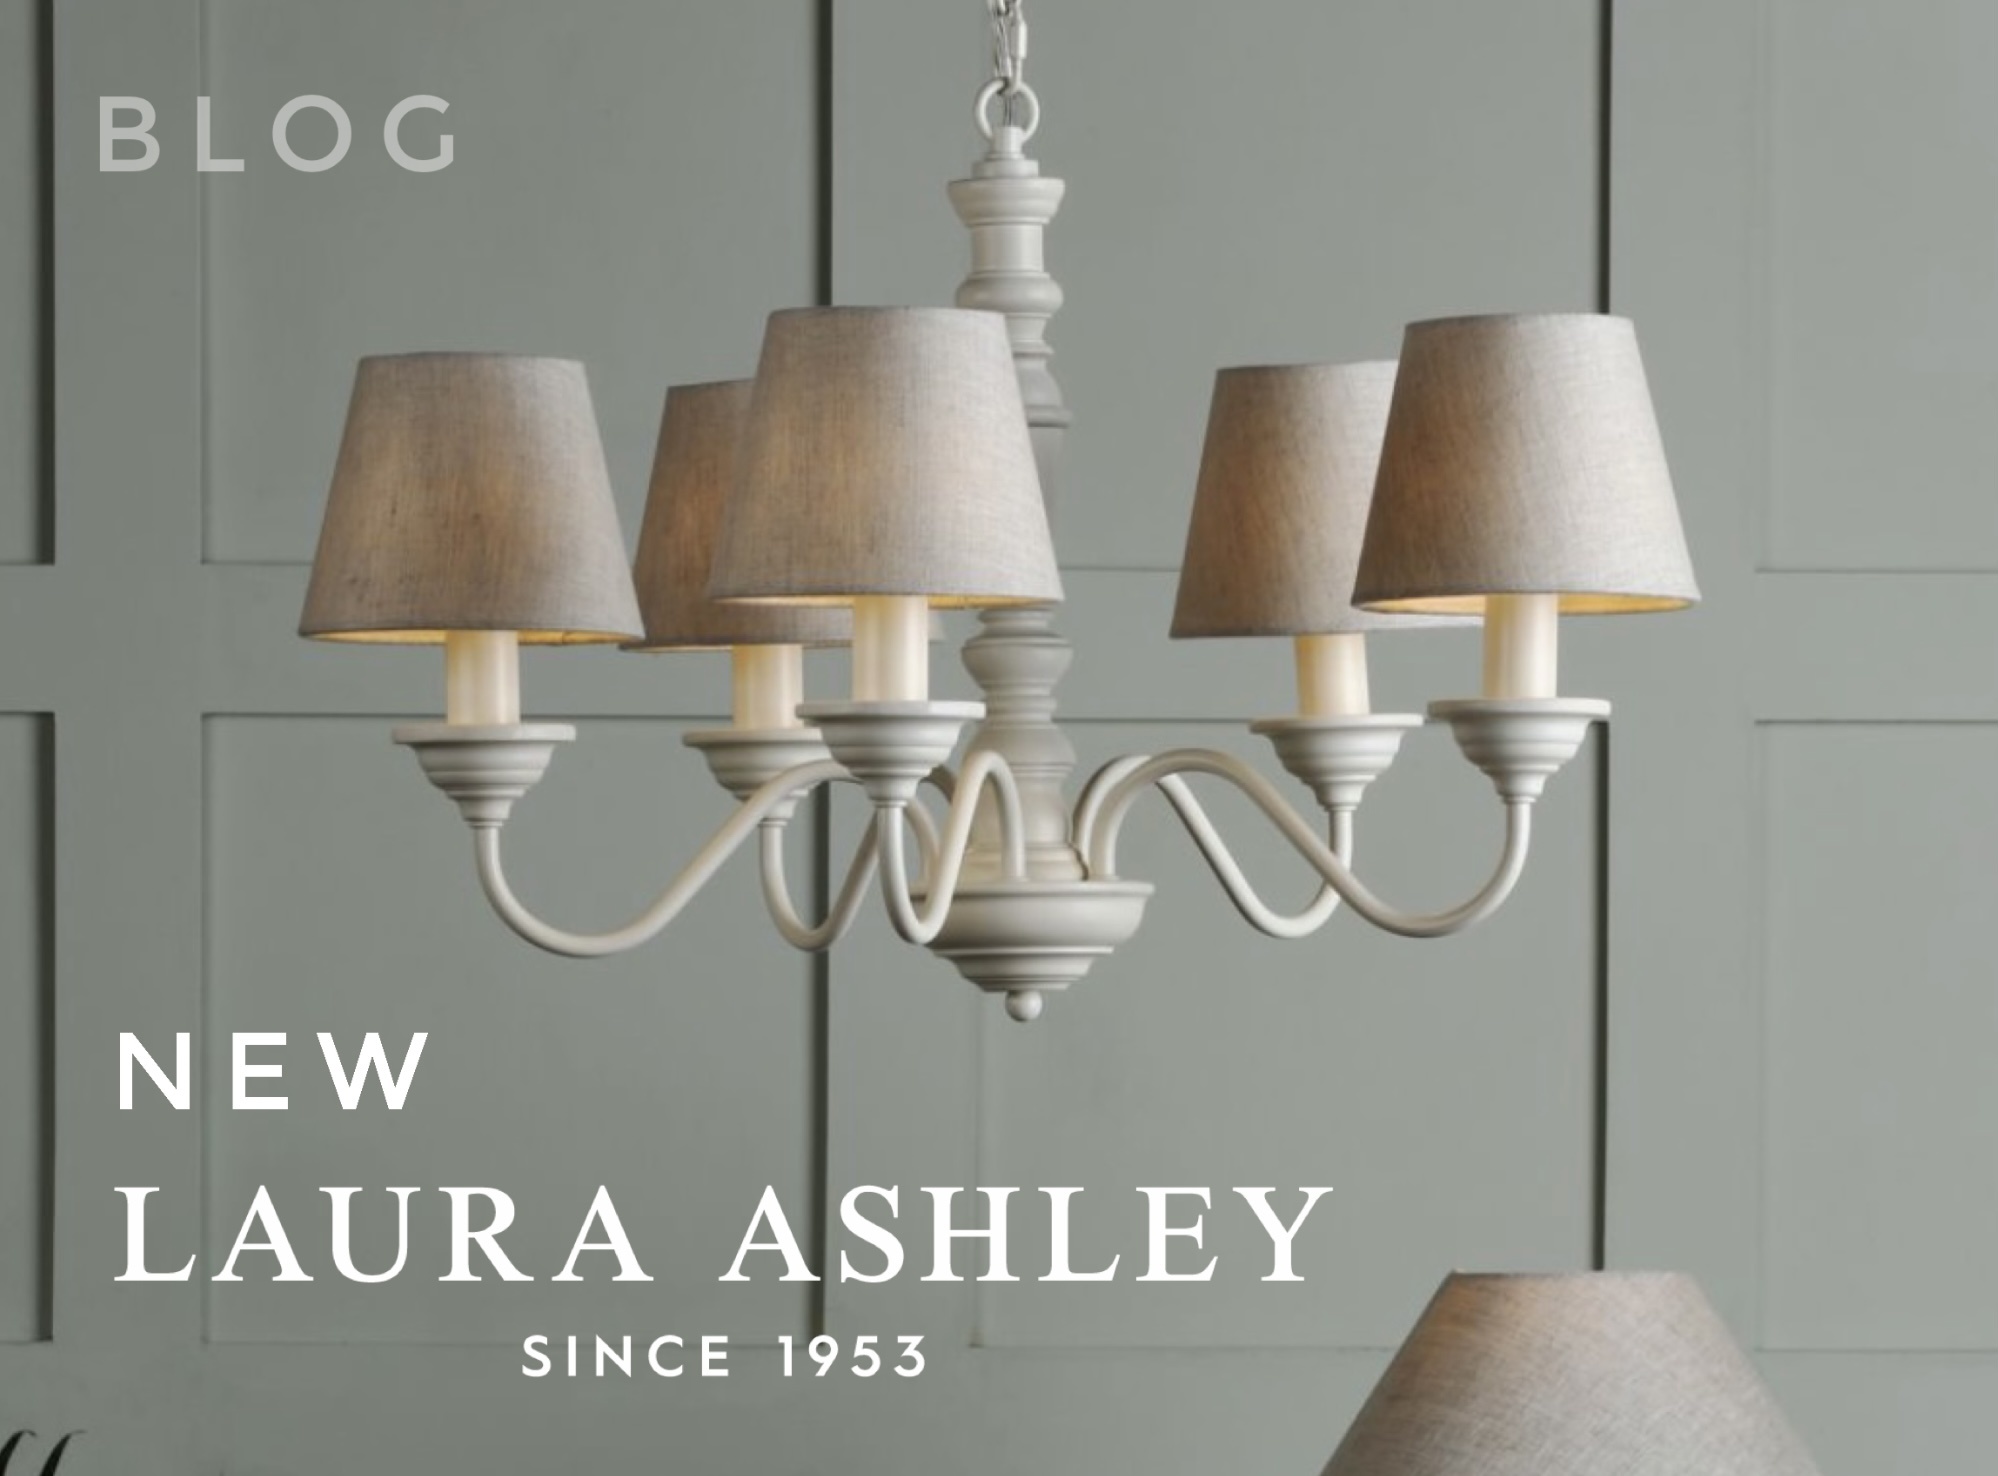 The Laura Ashley Spring 2022 Lighting Collection is Here! - Lightbox